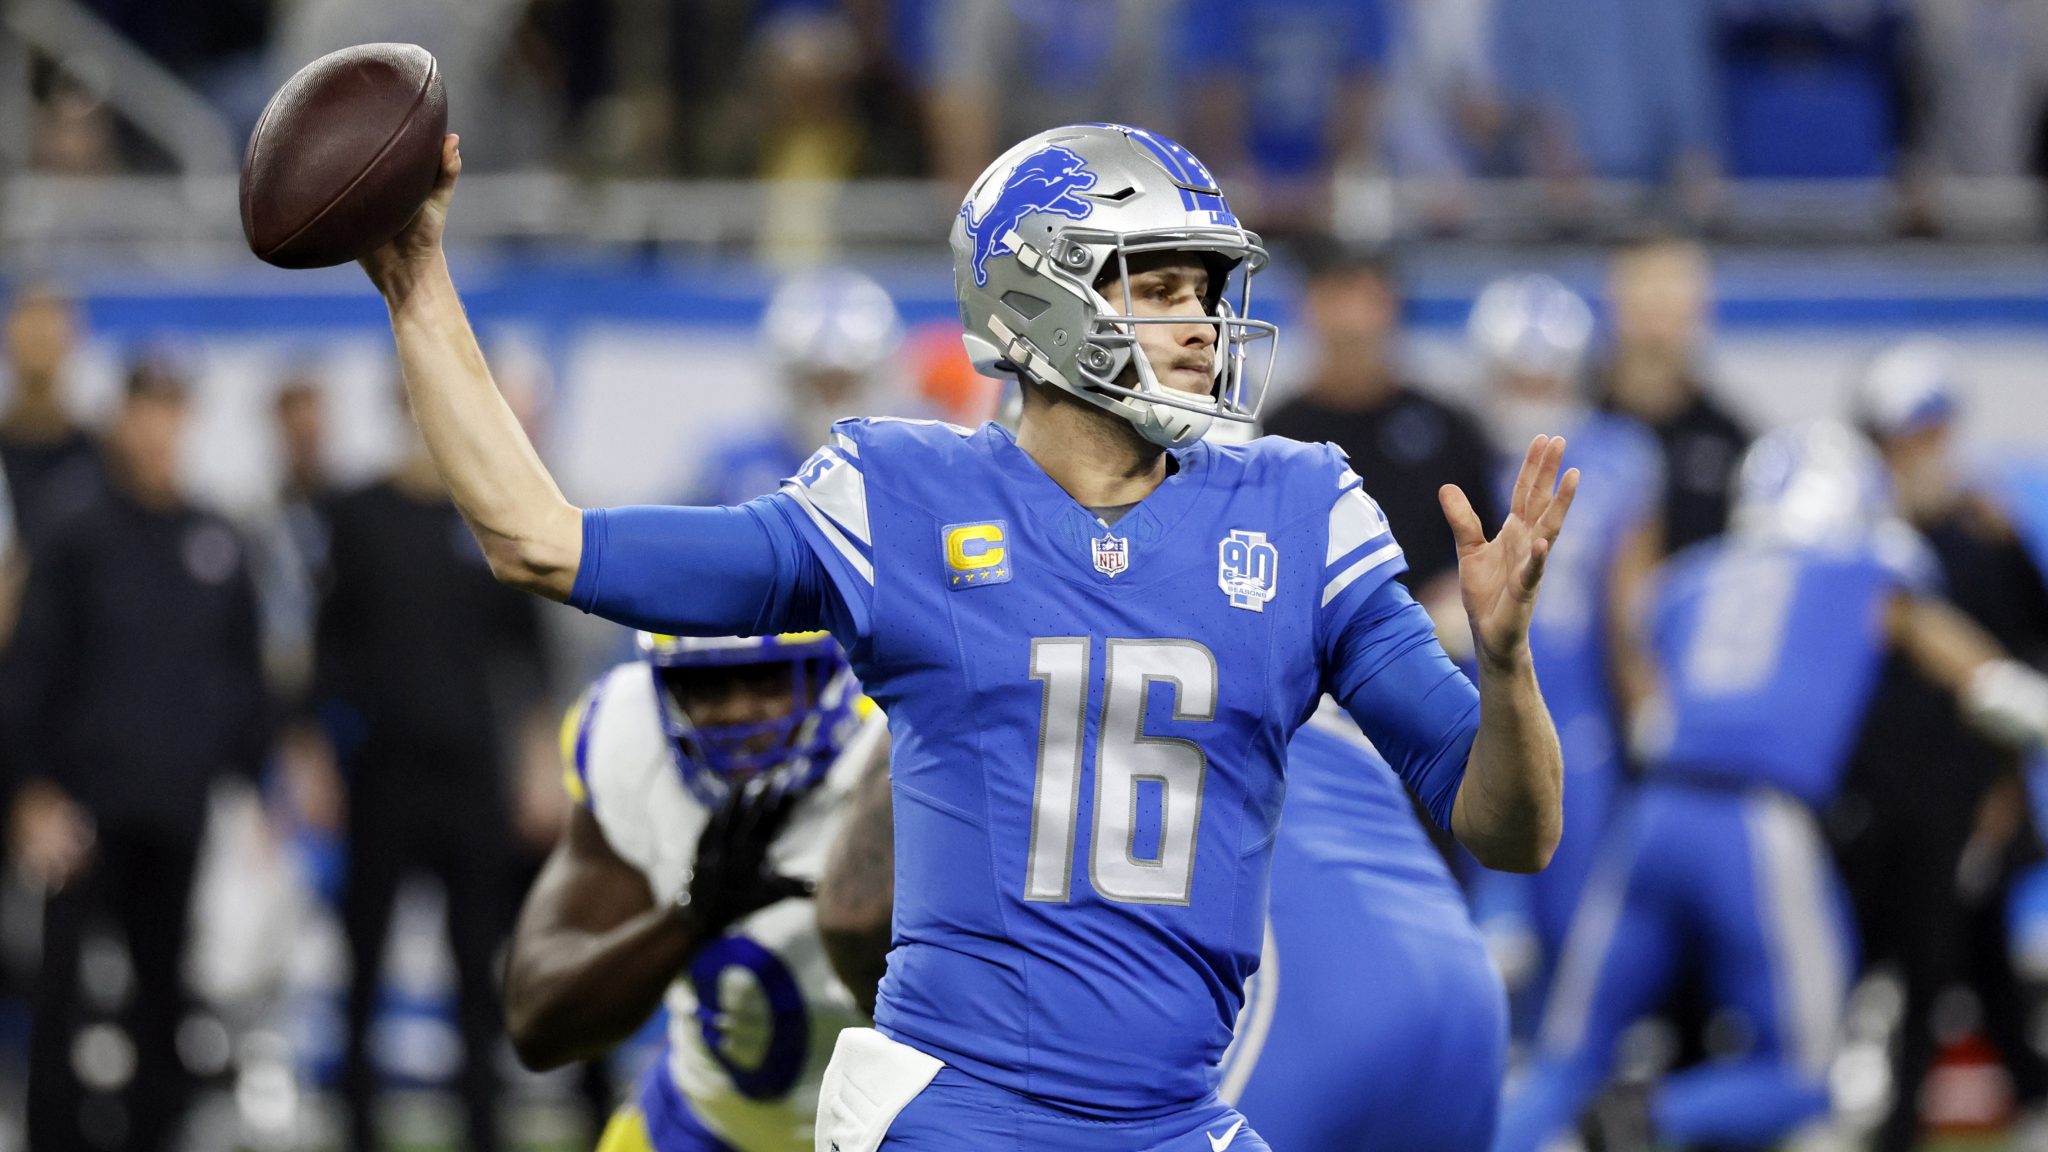 Jared Goff Leads Lions To First Playoff Win In 32 Years 24 23 Over Matthew Stafford And The 